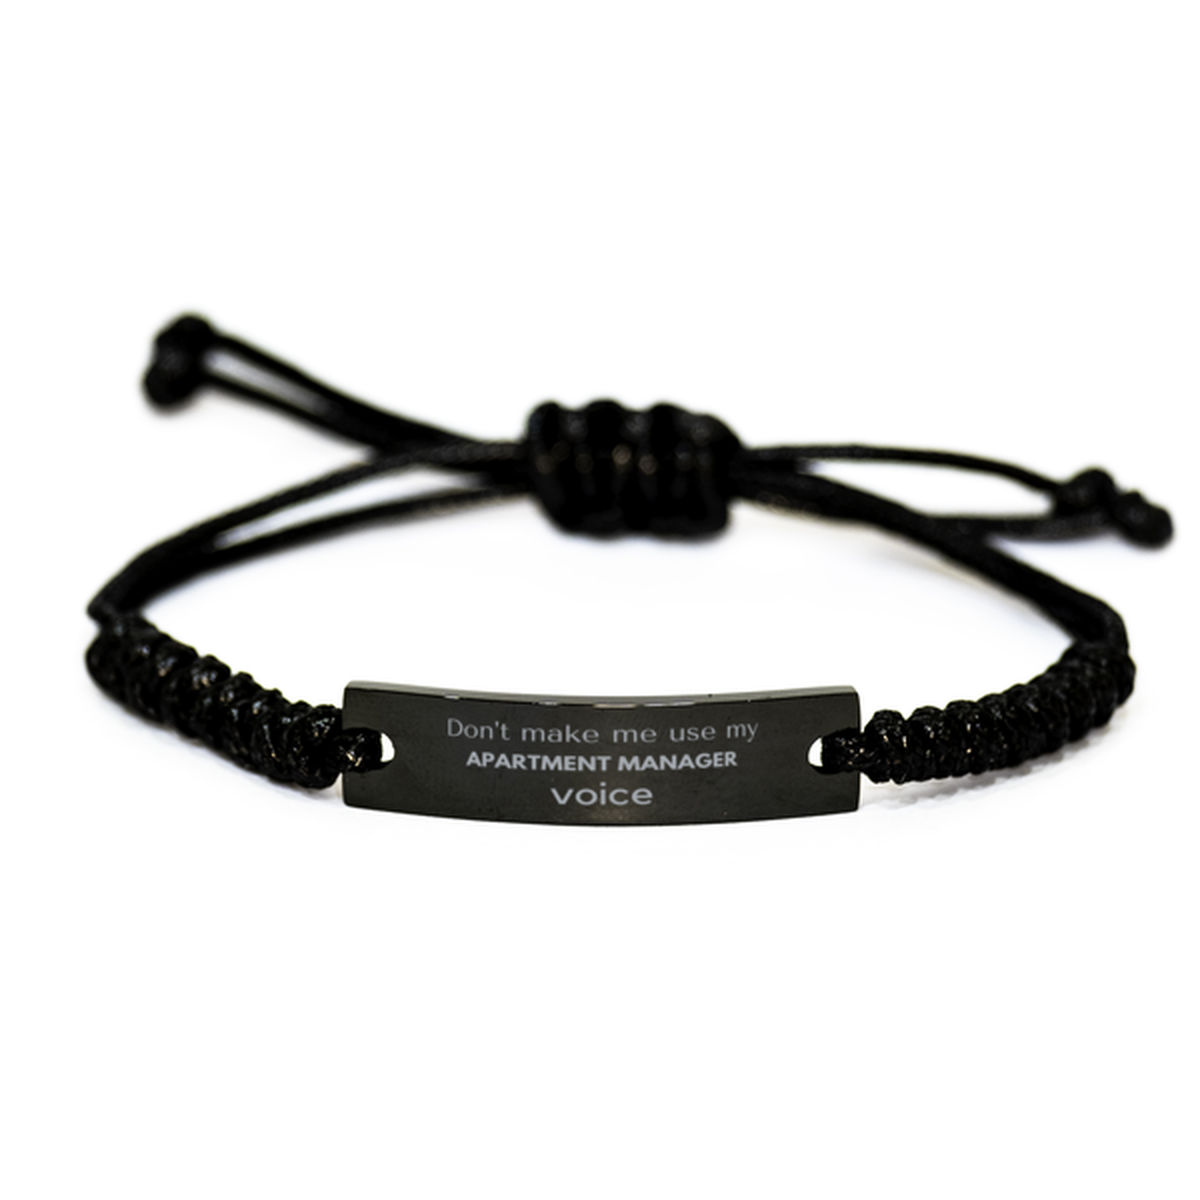 Don't make me use my Apartment Manager voice, Sarcasm Apartment Manager Gifts, Christmas Apartment Manager Black Rope Bracelet Birthday Unique Gifts For Apartment Manager Coworkers, Men, Women, Colleague, Friends